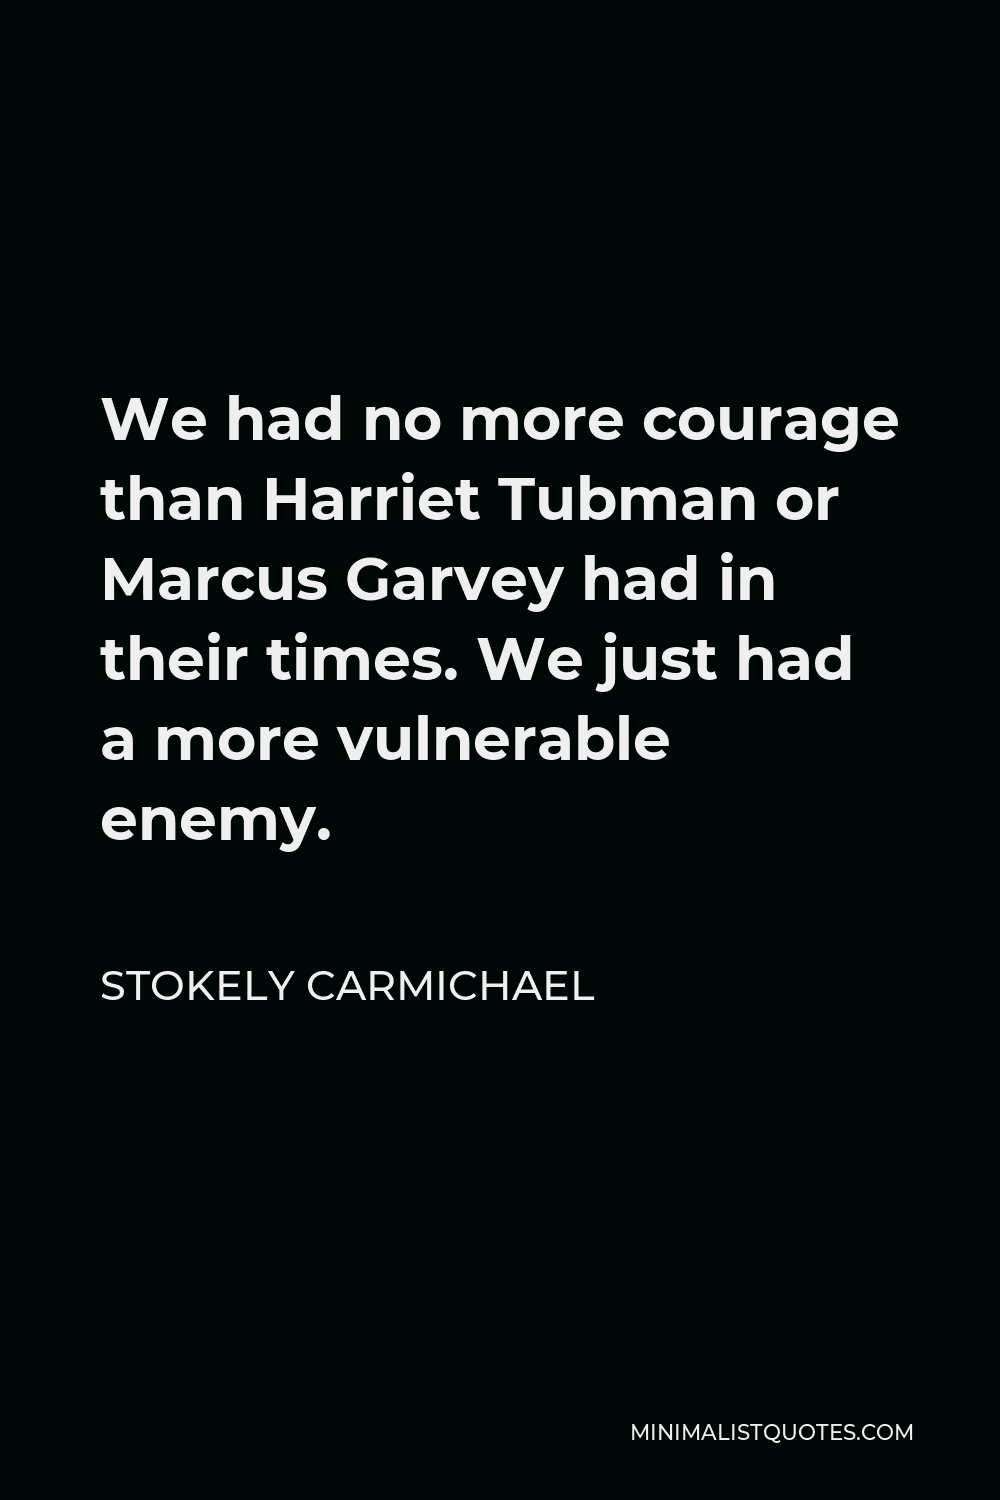 Stokely Carmichael Quote - We had no more courage than Harriet Tubman or Marcus Garvey had in their times. We just had a more vulnerable enemy.